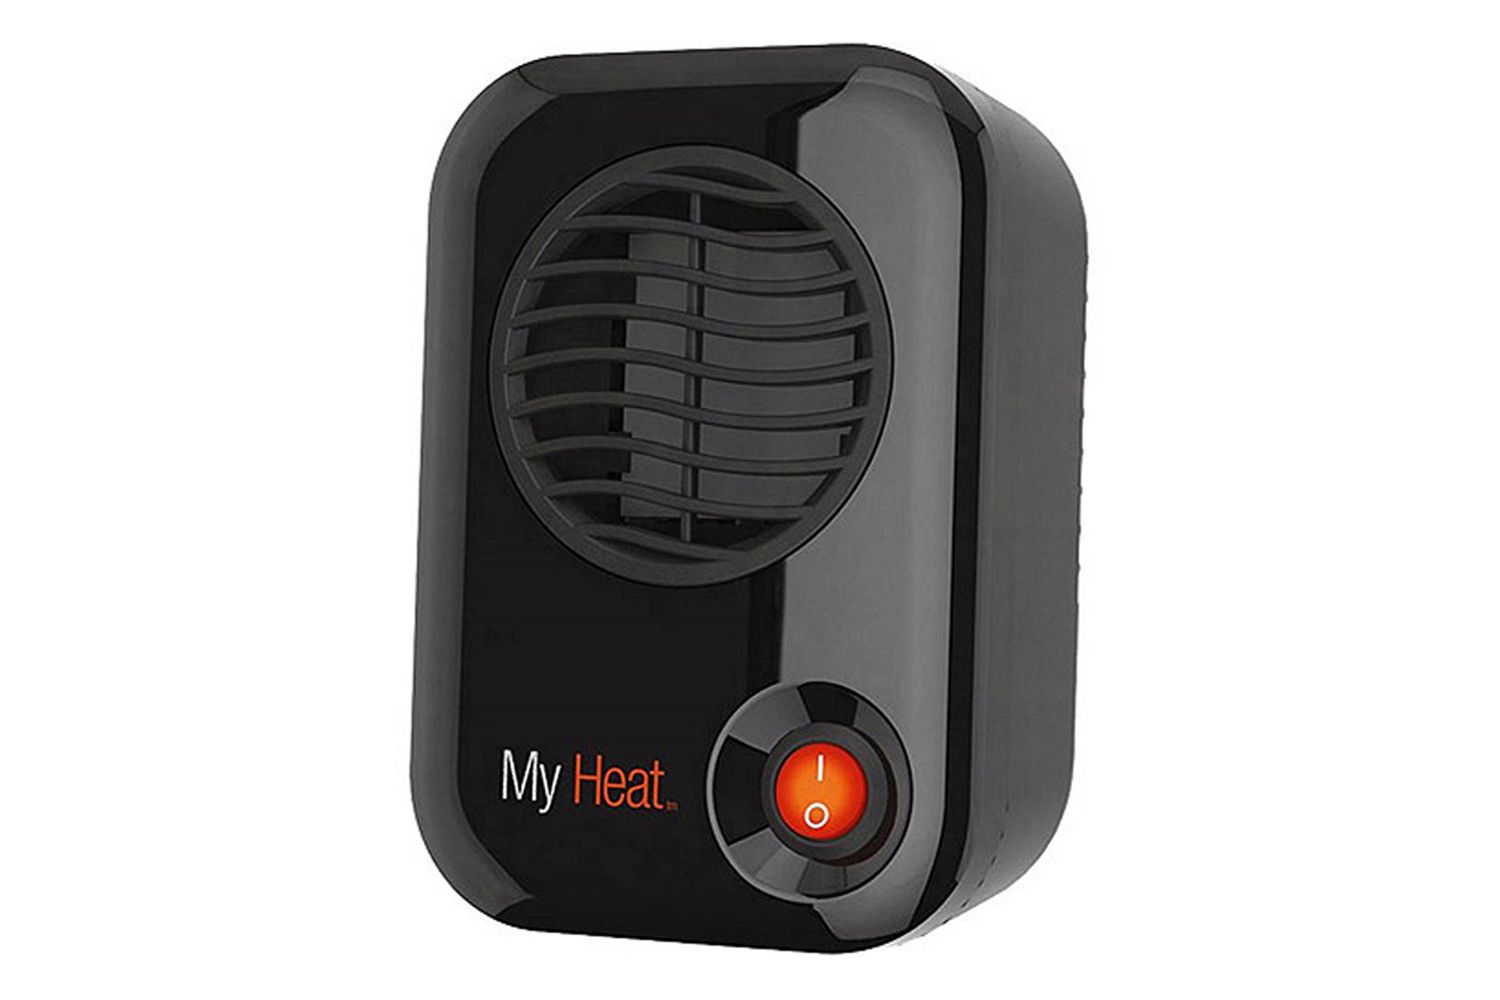 The Lasko Myheat Personal Heater Will Keep You Warm At Work Real Simple